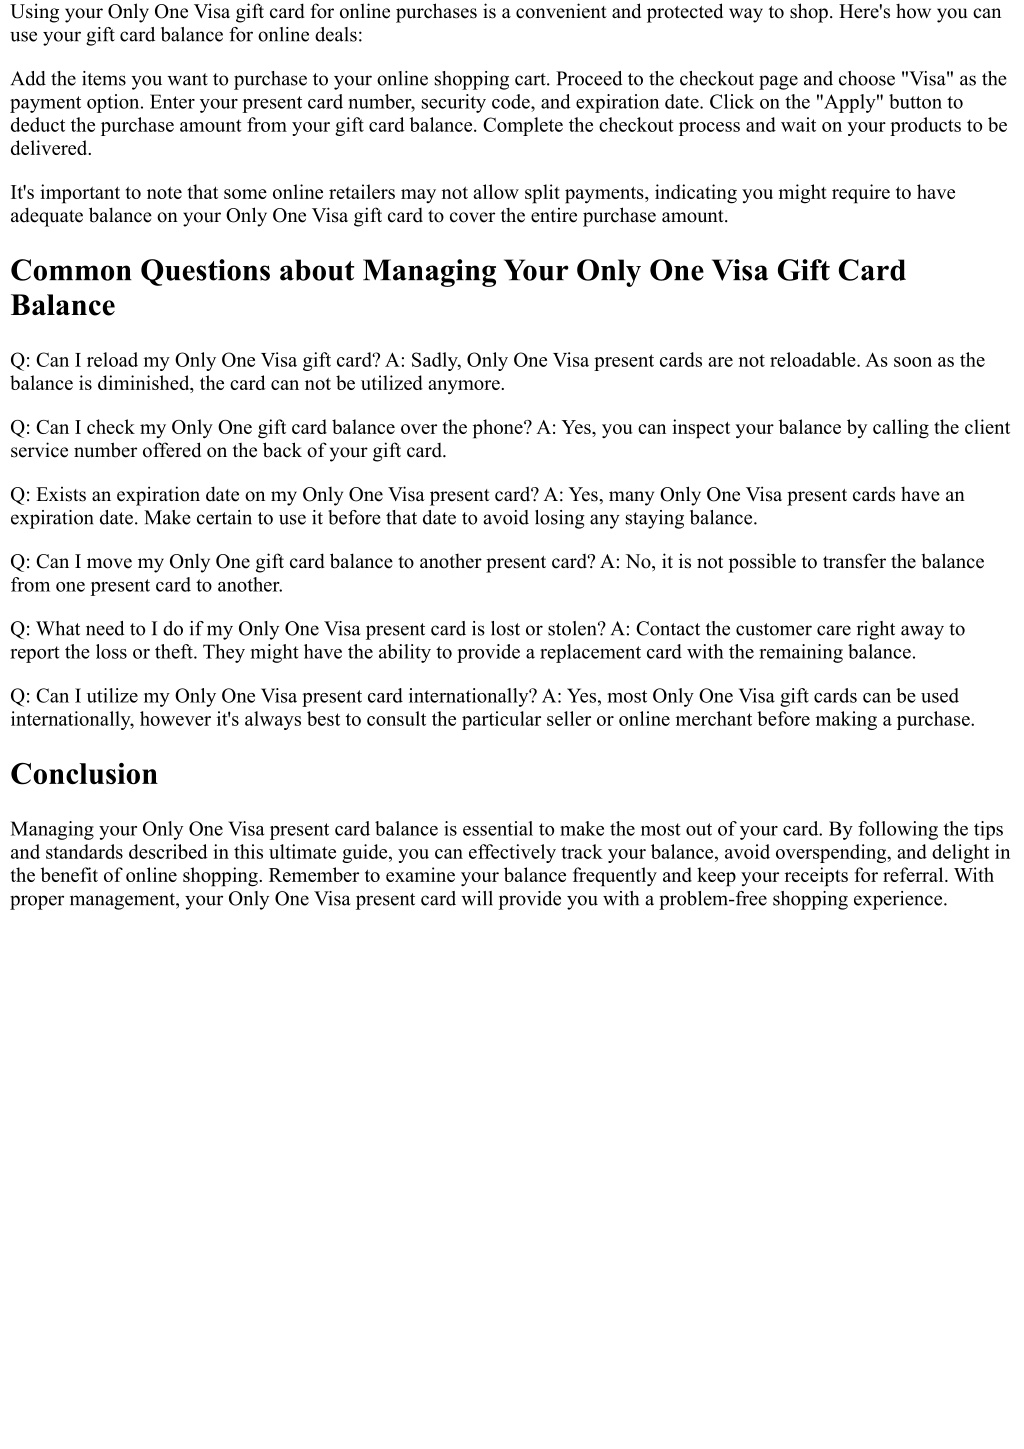 PPT - The Ultimate Guide to Handling Your Only One Visa Gift Card